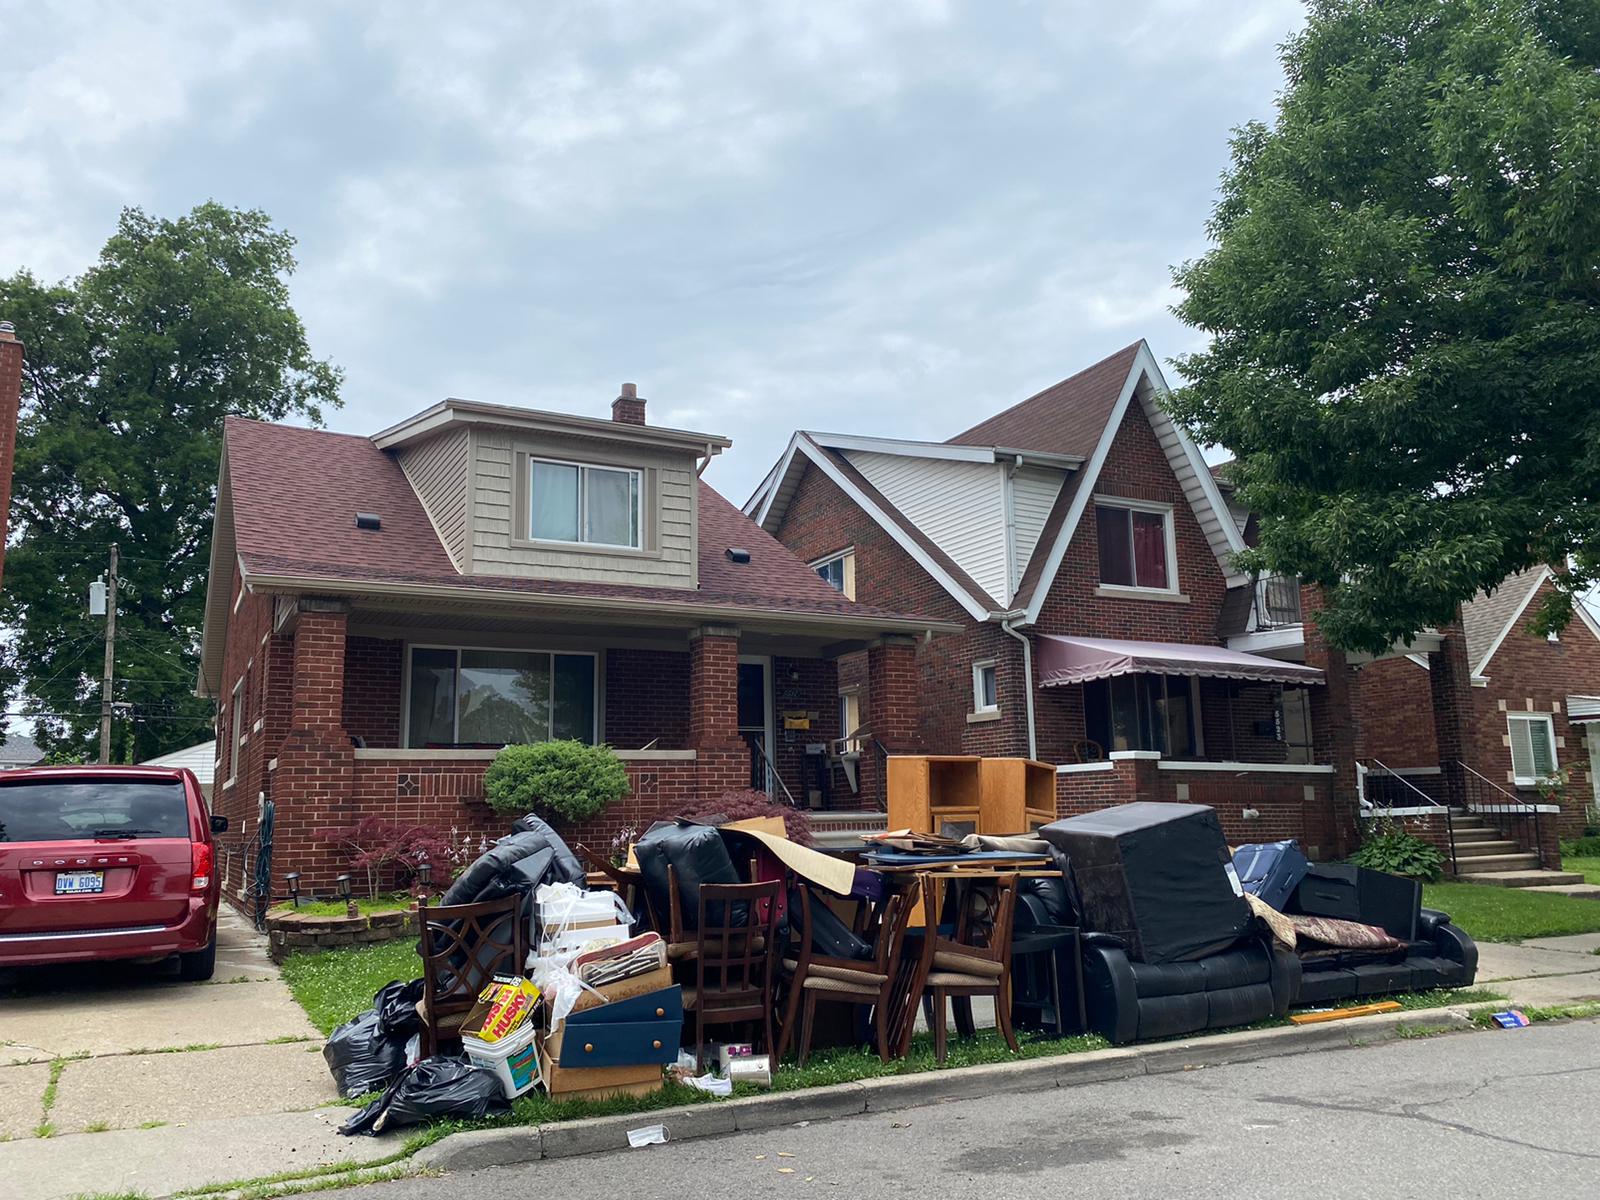 Heaps of damaged furniture from the flooding sits on the curb and overflow the city streets, waiting for emergency trash pick up. Photo: Imad Mohamad / The Arab American News